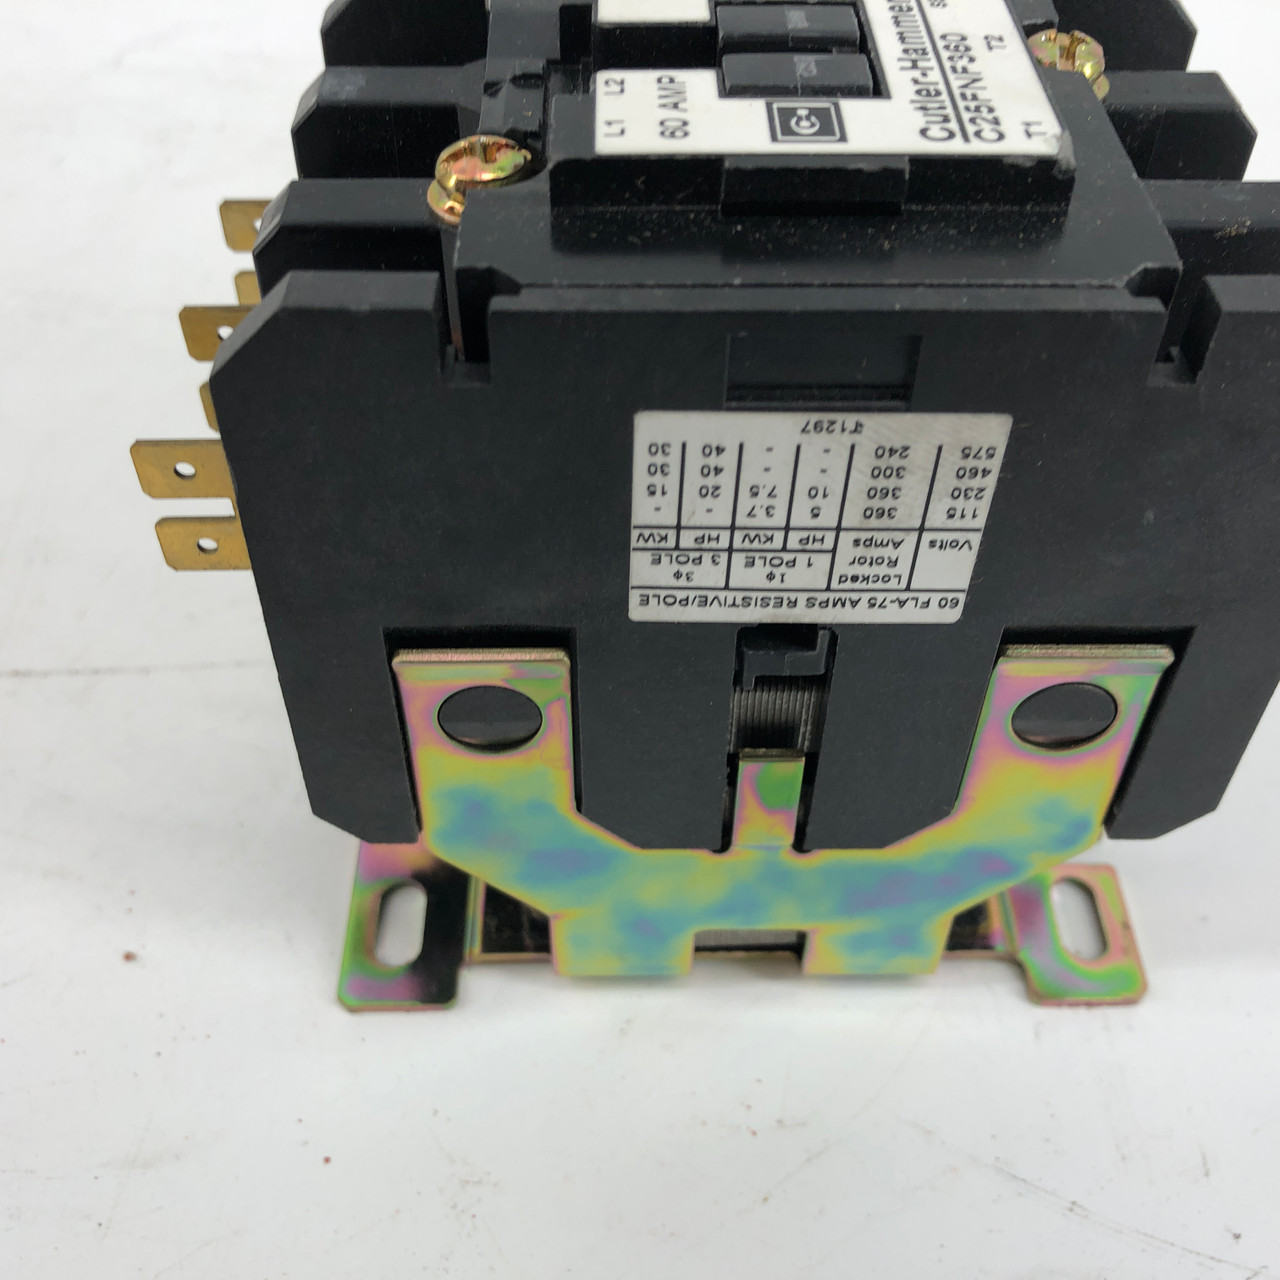 CUTLER HAMMER C25FNF360AA 3 POLE 60A 104/120V DEFINITE PURPOSE CONTACTOR - NEW